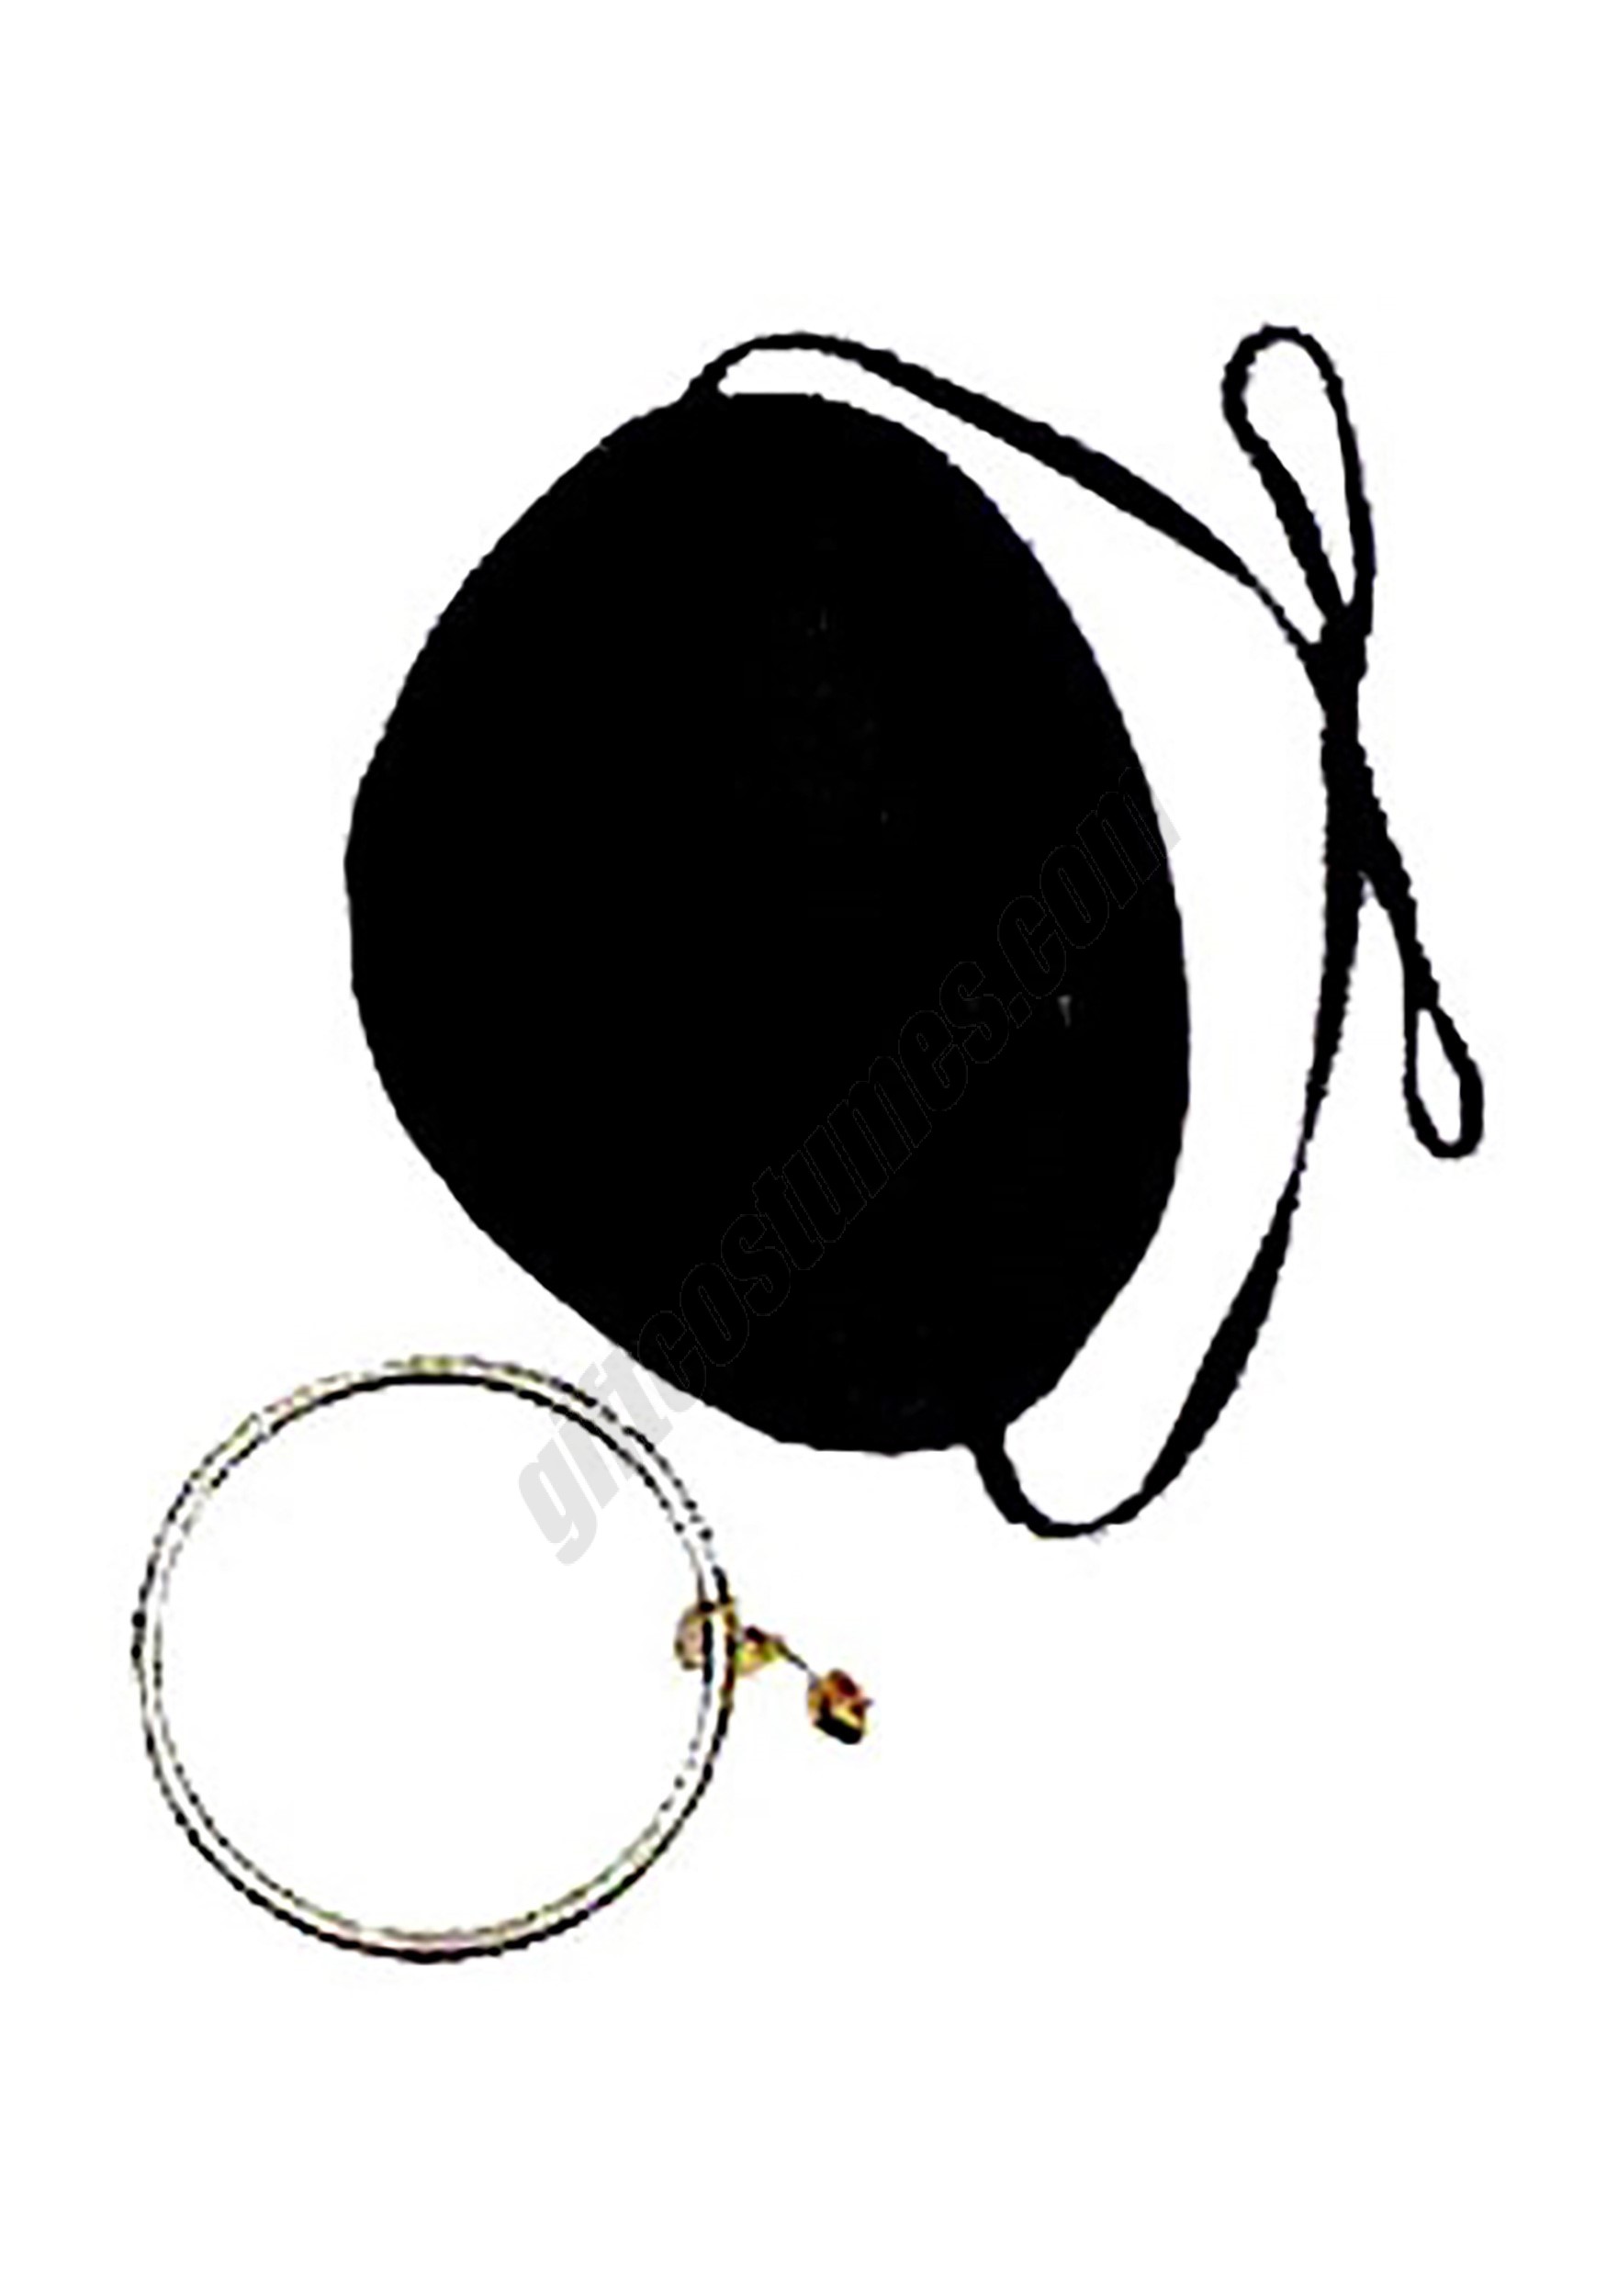 Satin Pirate Eye Patch w/Earring Promotions - Satin Pirate Eye Patch w/Earring Promotions